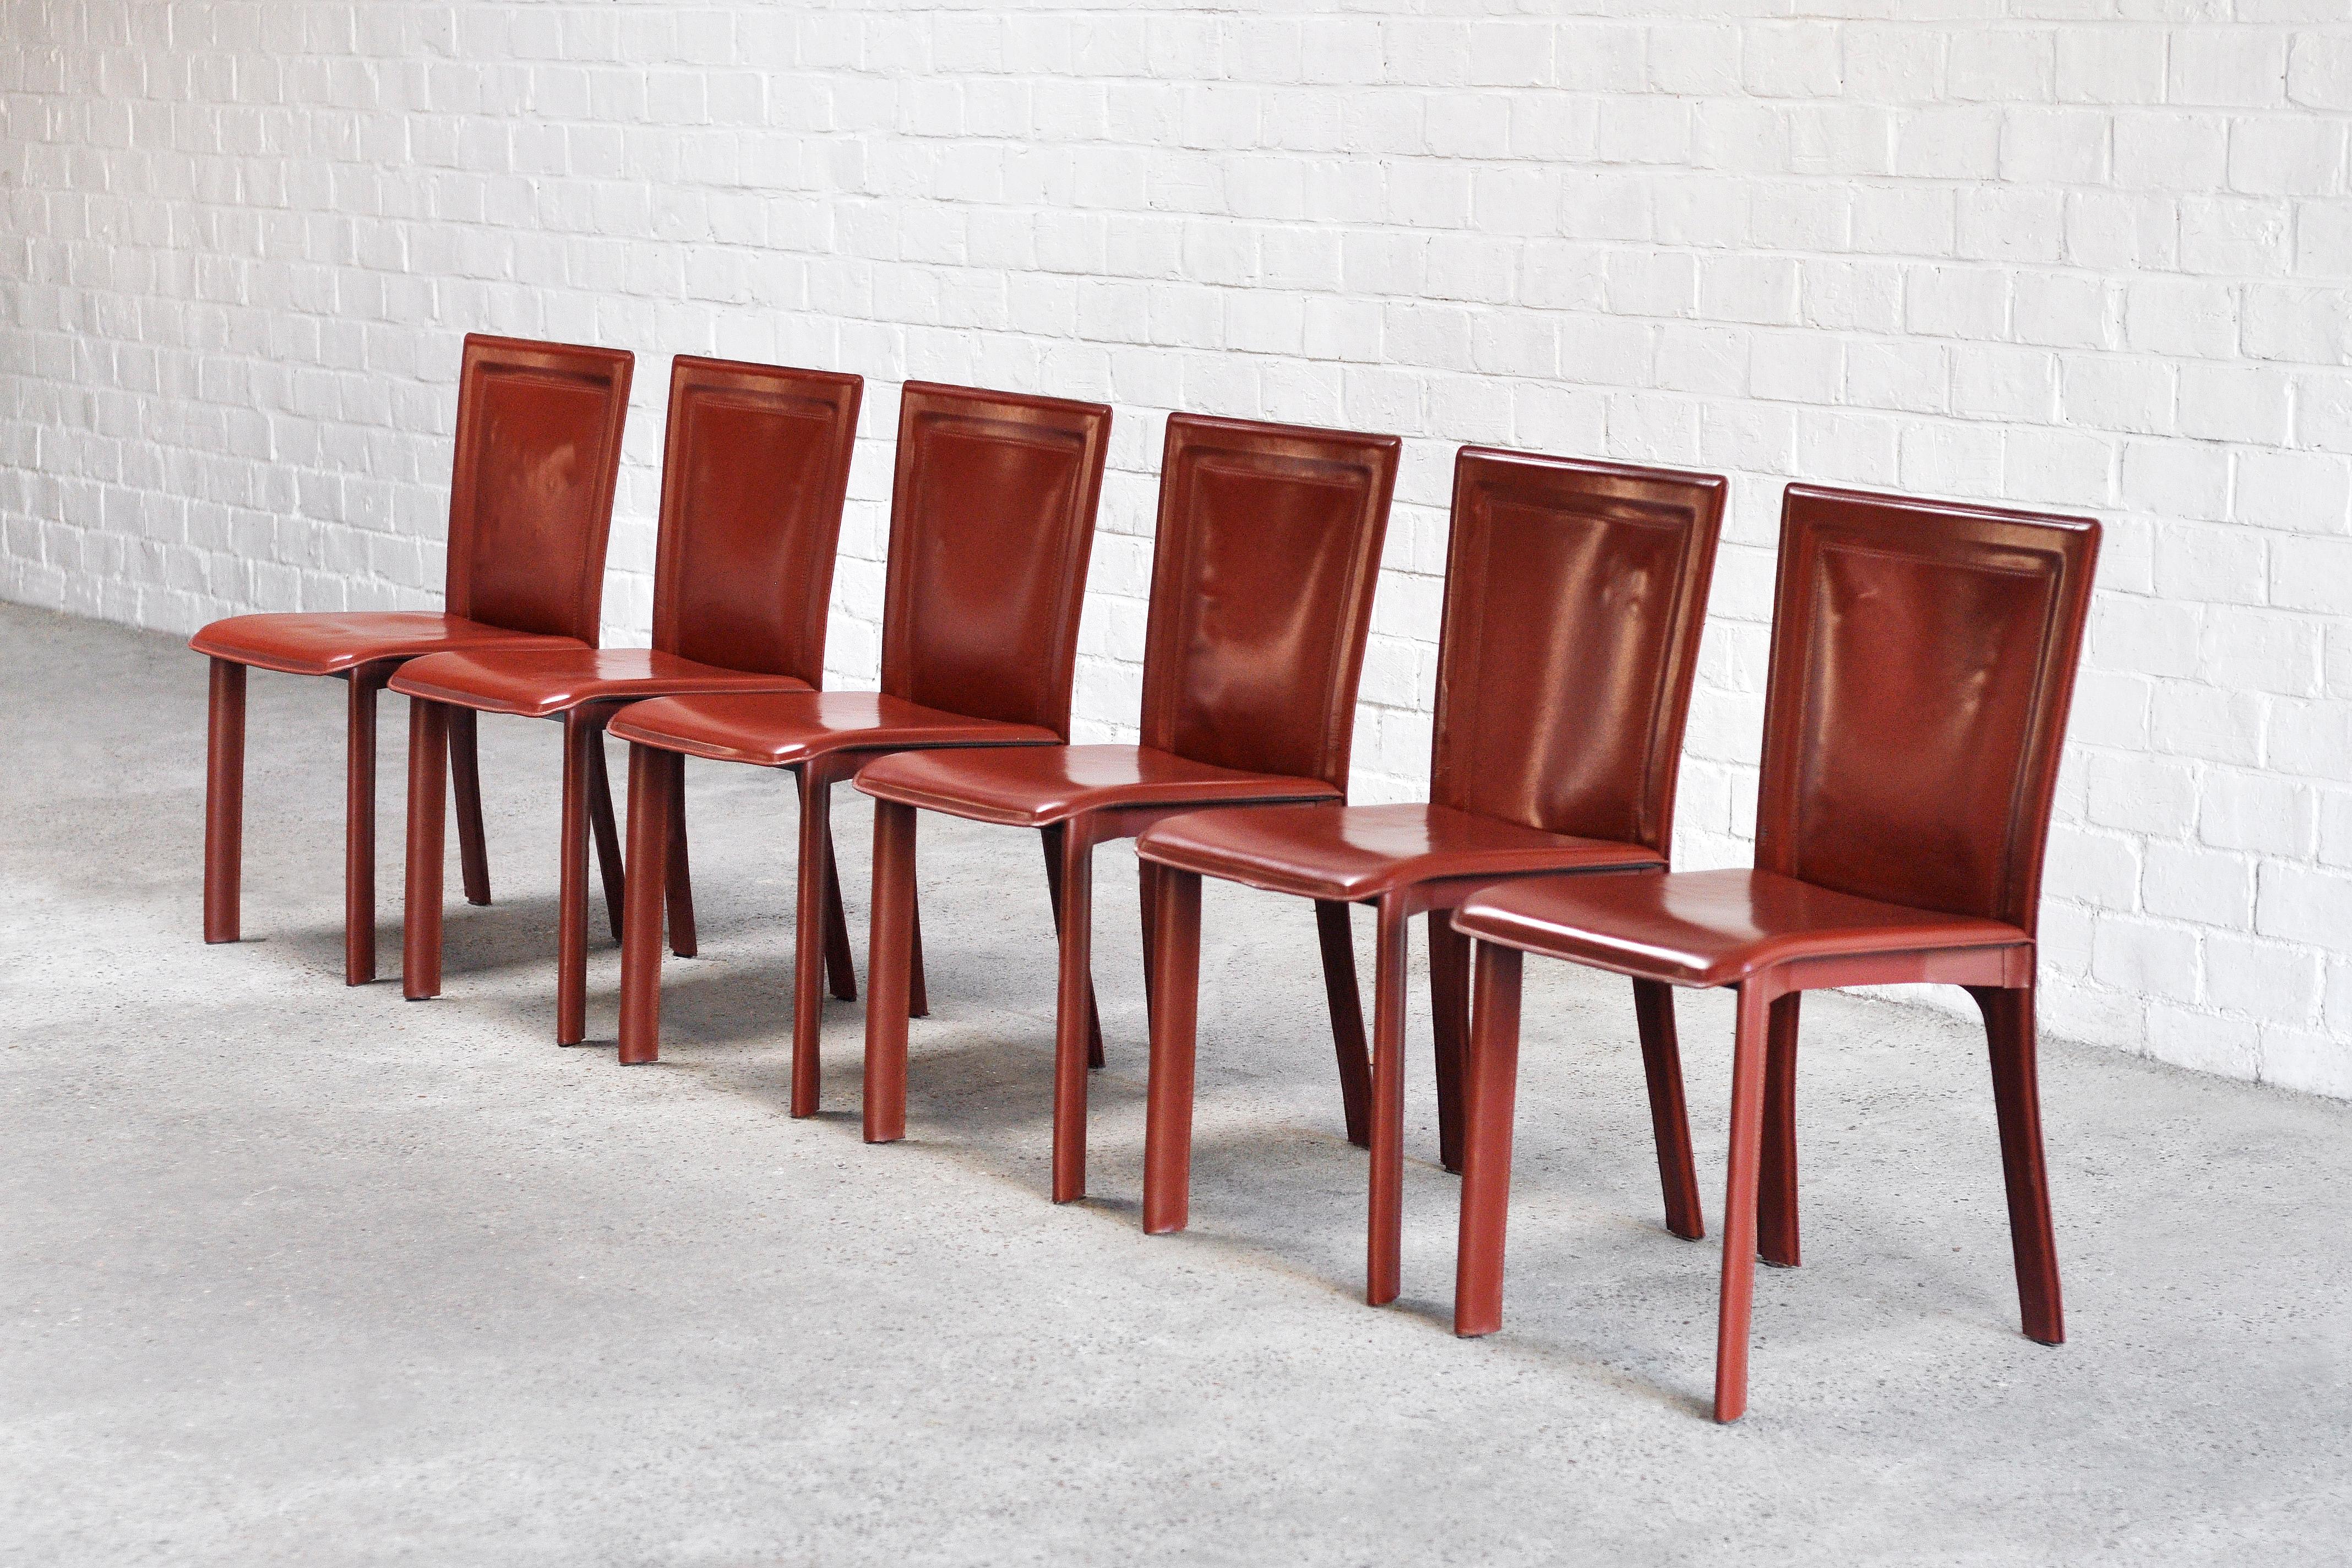 A beautiful set of six Italian dining chairs in a warm red leather, 1980s. These chairs are very much in the style of Mario Bellini or Matteo Grassi, but are unbranded. They show a high level of manufacturing with a very sturdy structure and quality